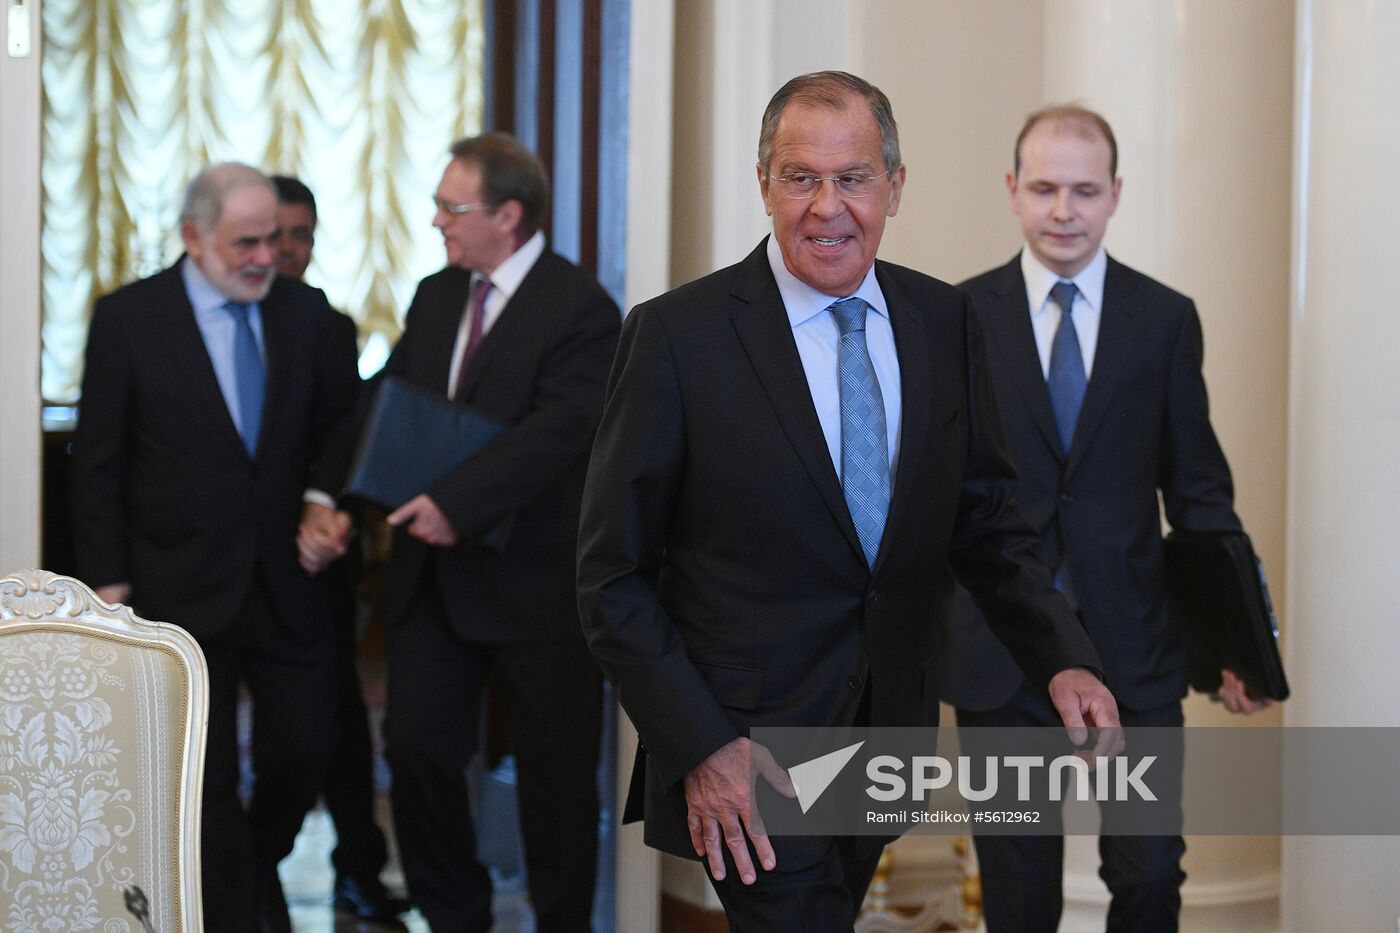 Russian Foreign Minister Lavrov meets with his Lebanese counterpart Bassil